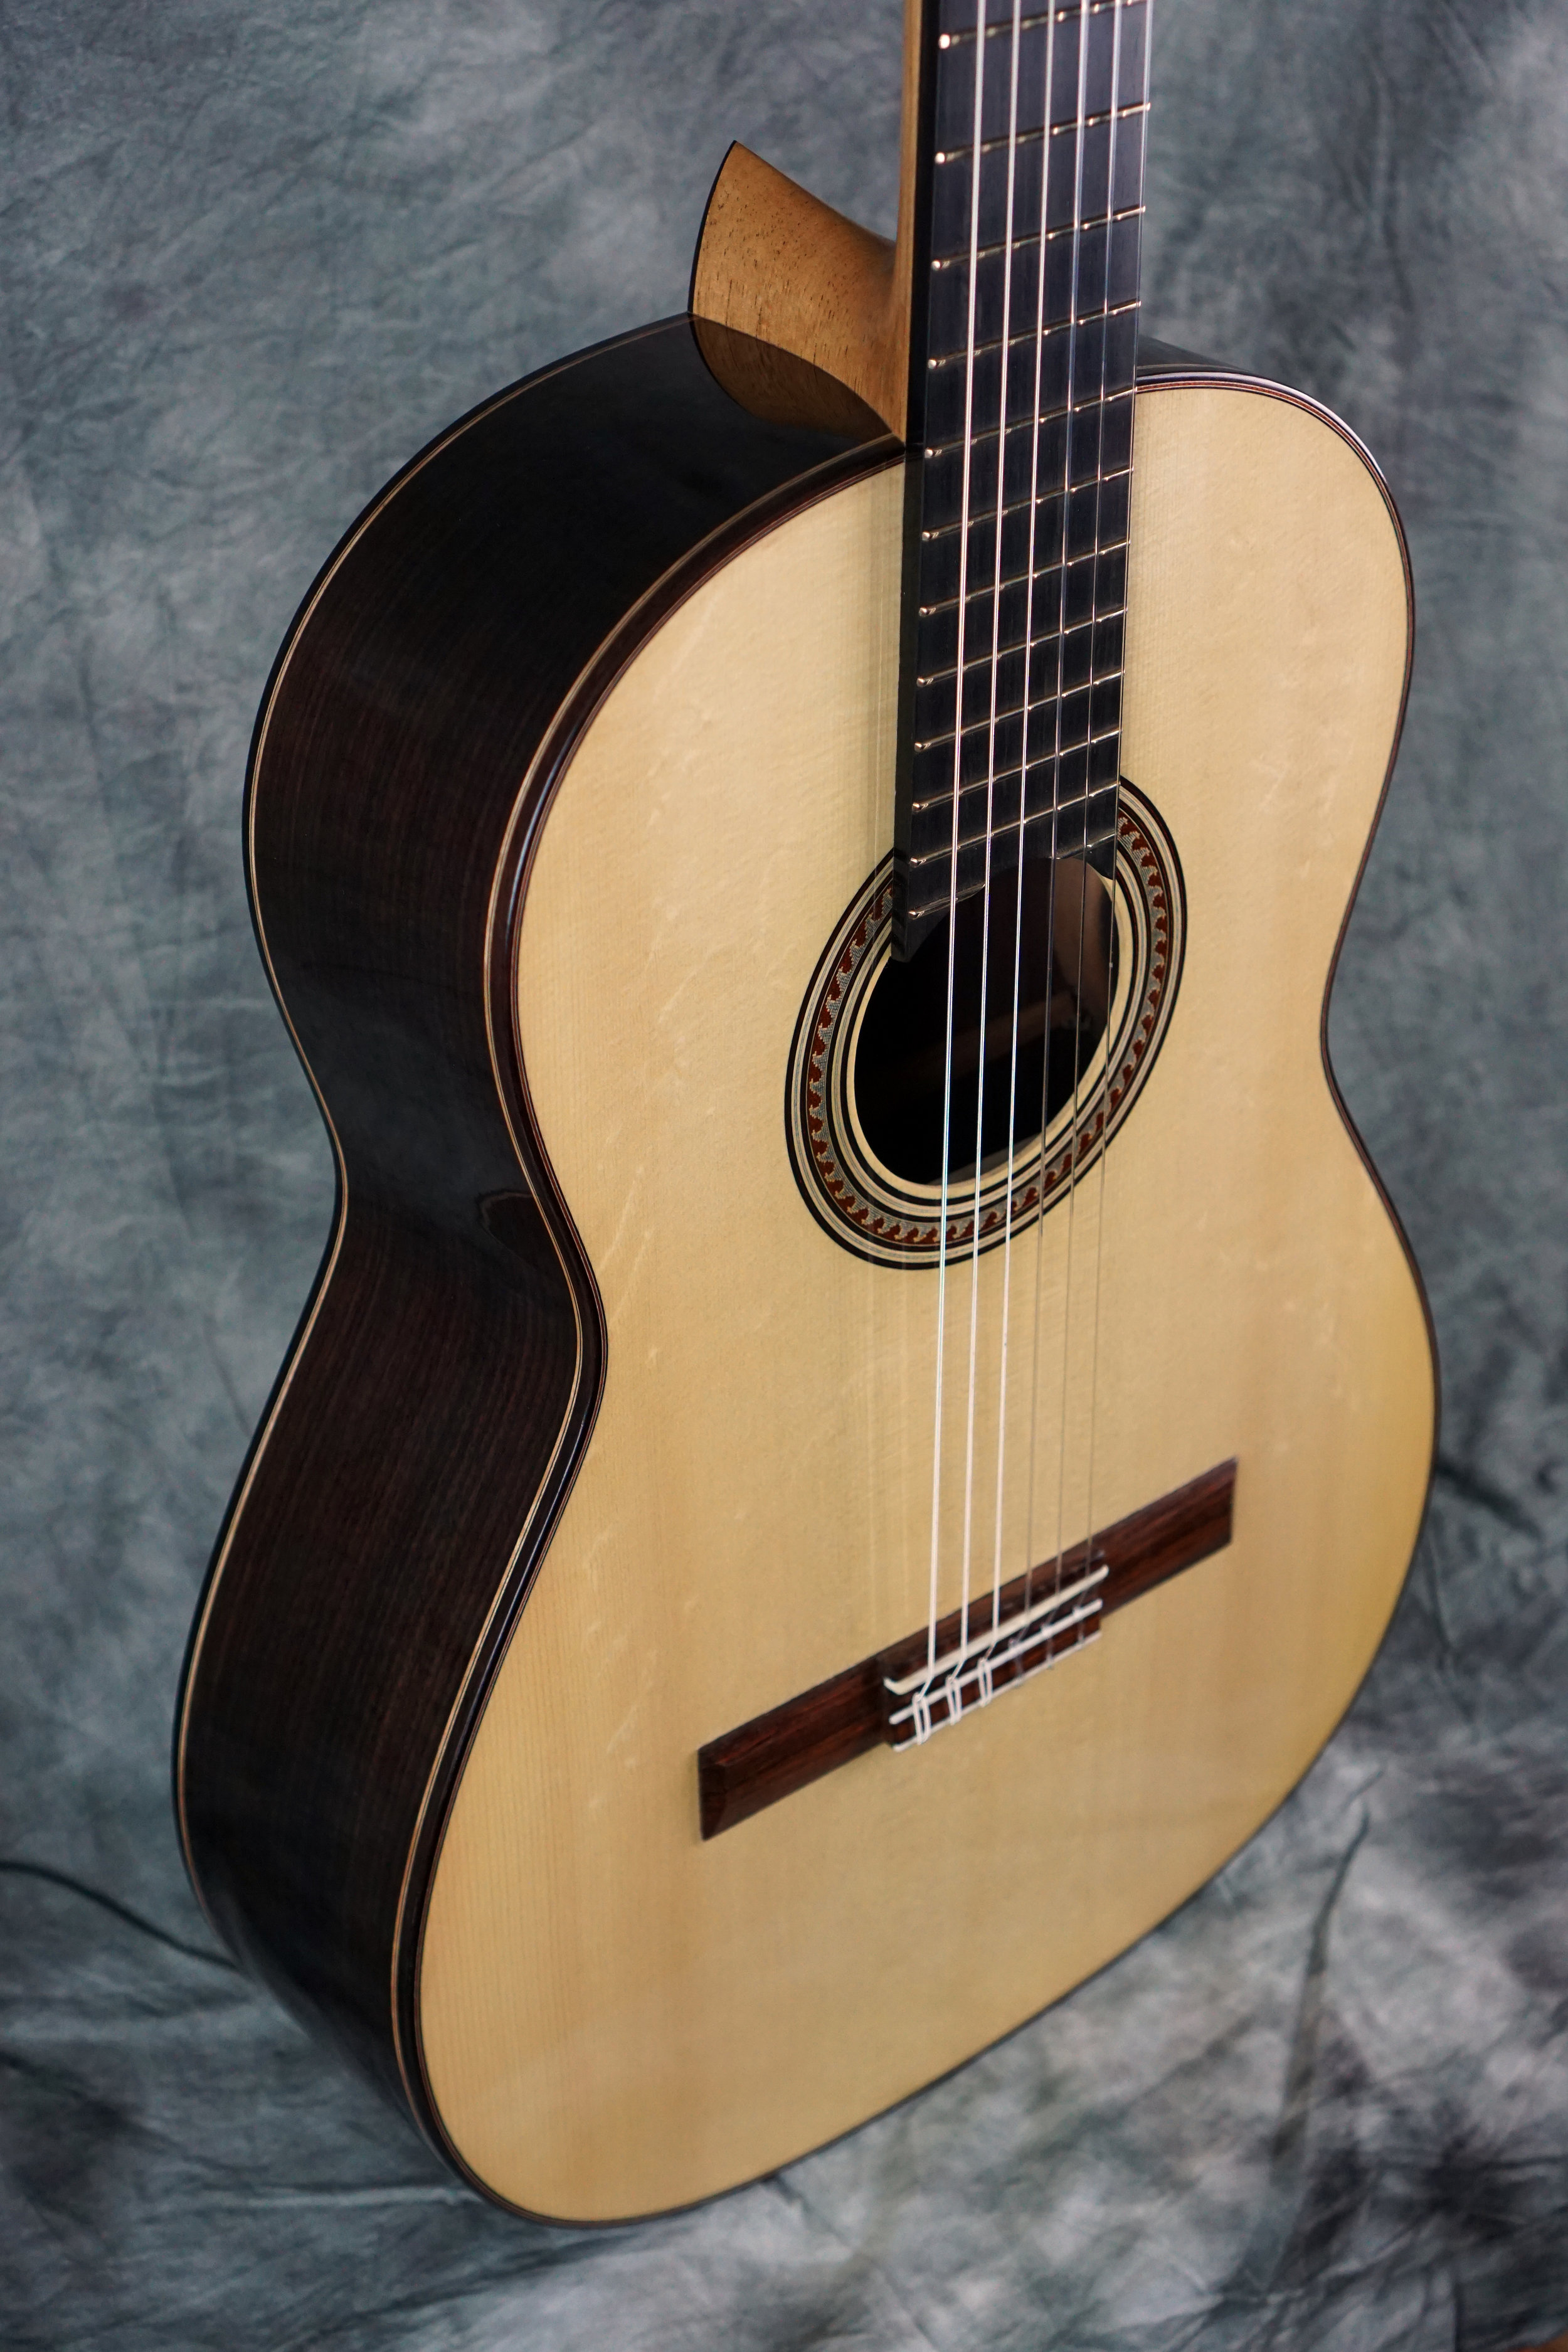  Concert classical with bear claw euro spruce 